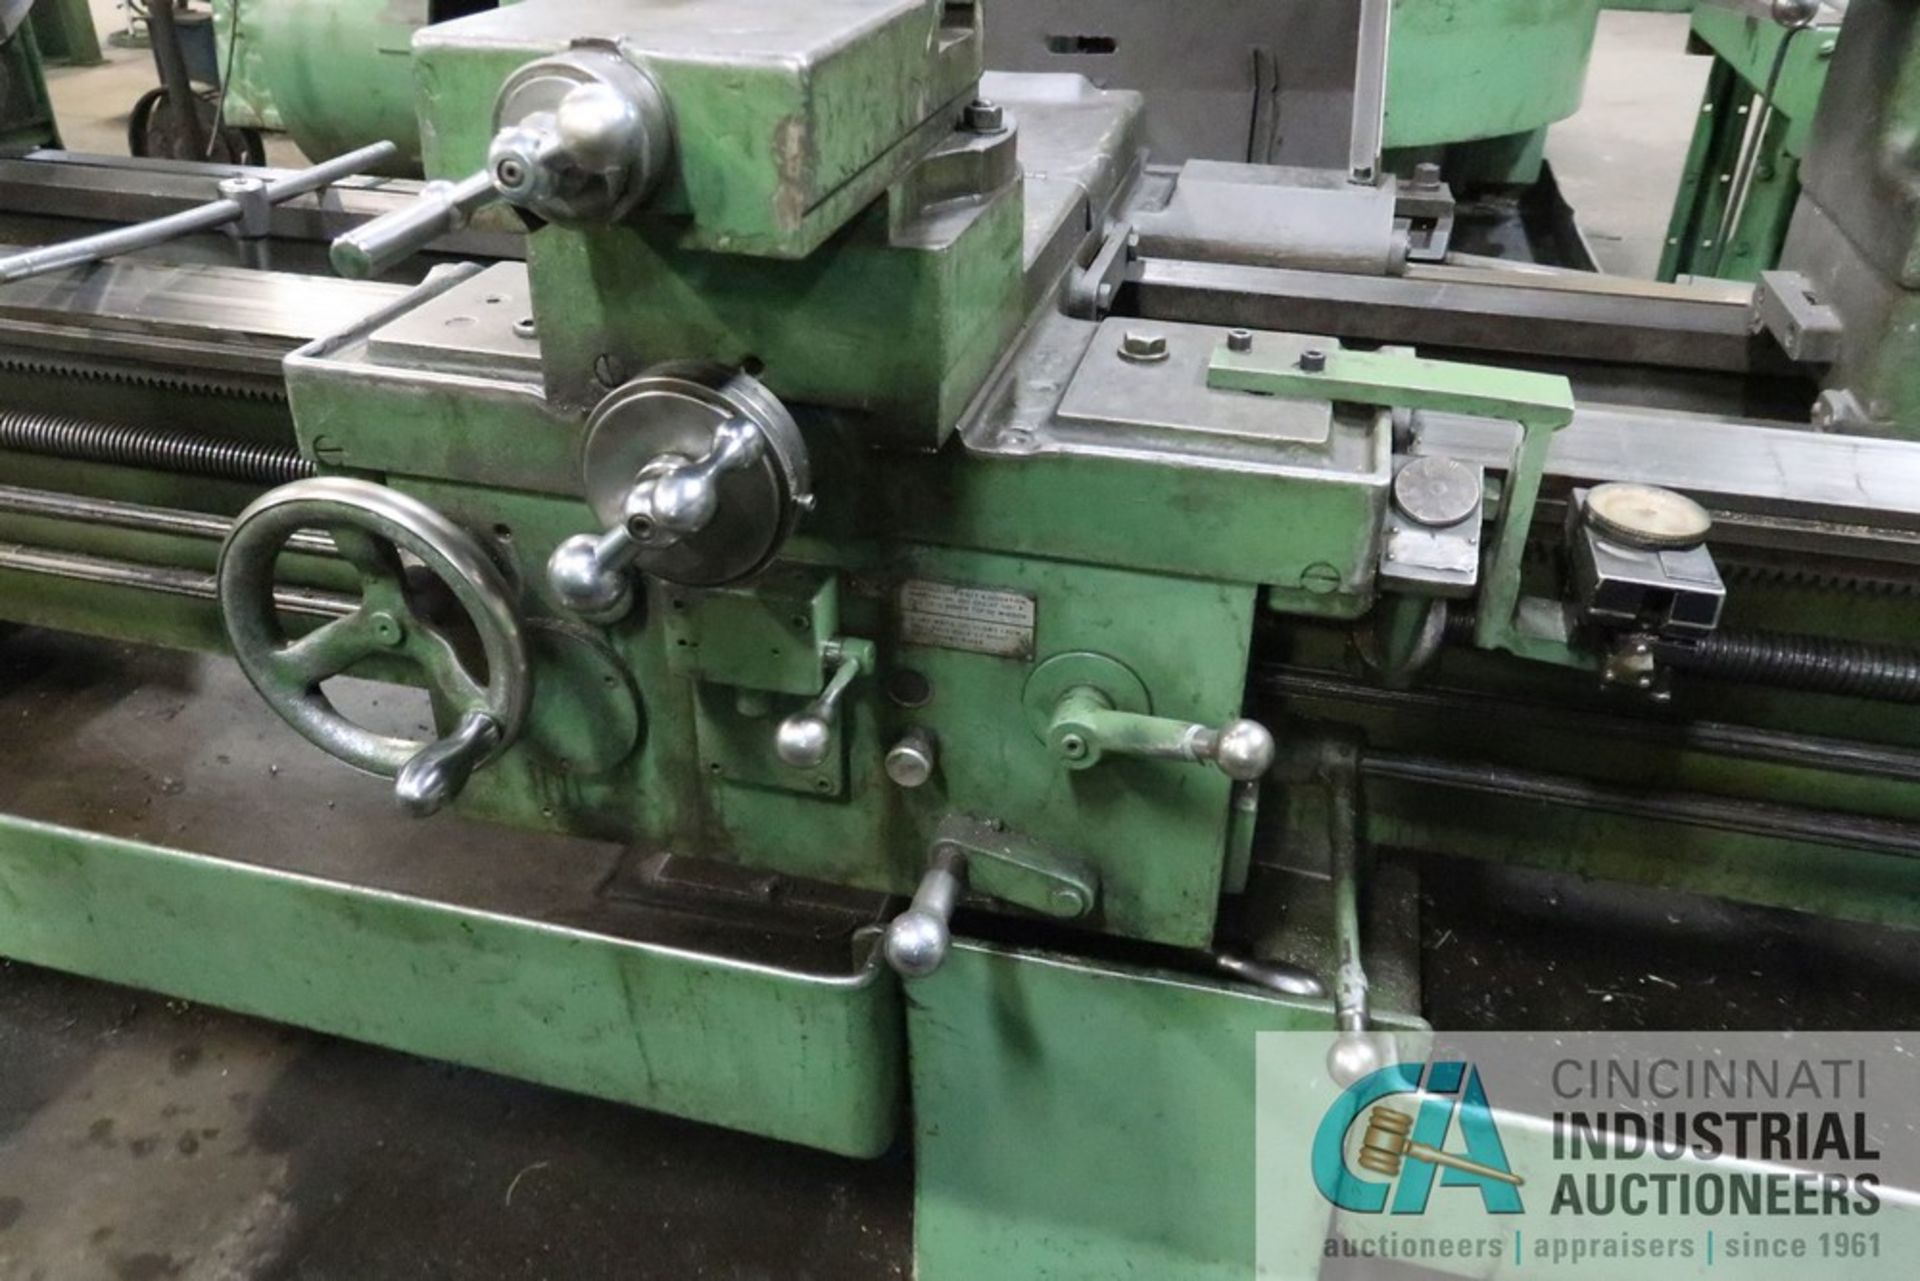 26" X 96" LEBLOND ENGINE LATHE; S/N 5H-555, 2" SPINDLE HOLE, 18" 4-JAW CHUCK, TAPER ATTACHMENT, - Image 10 of 15